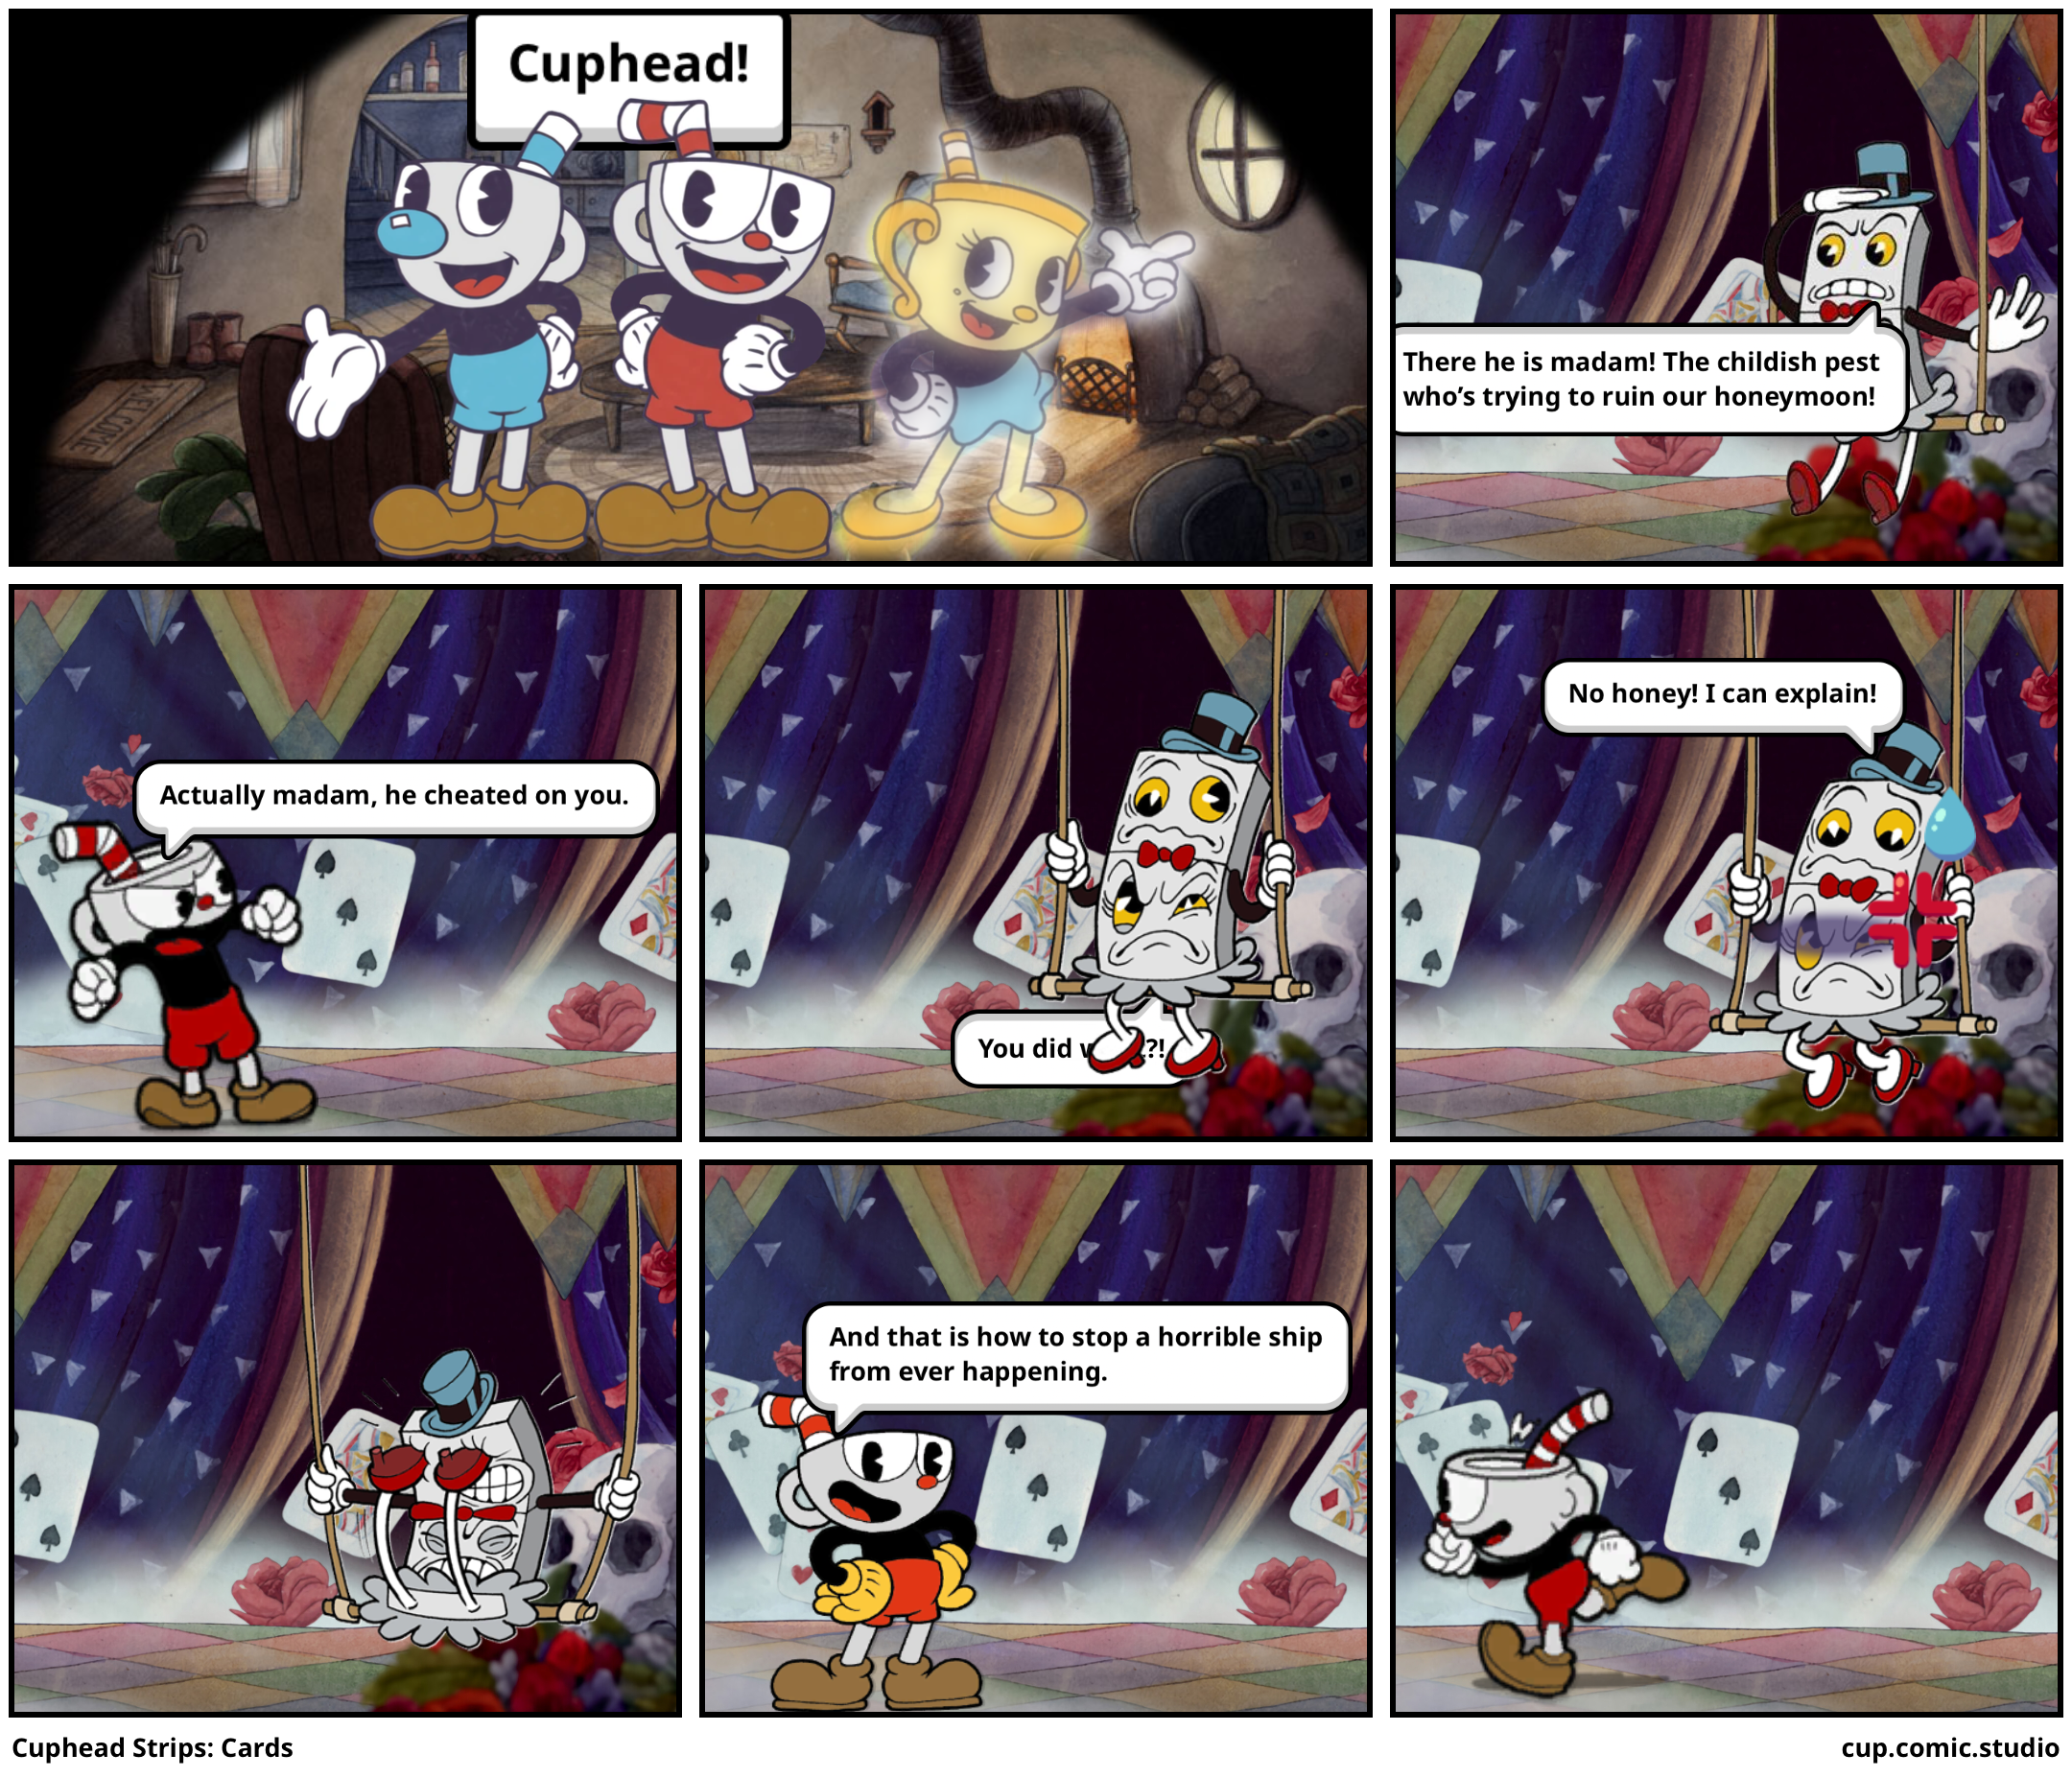 Cuphead Strips: Cards